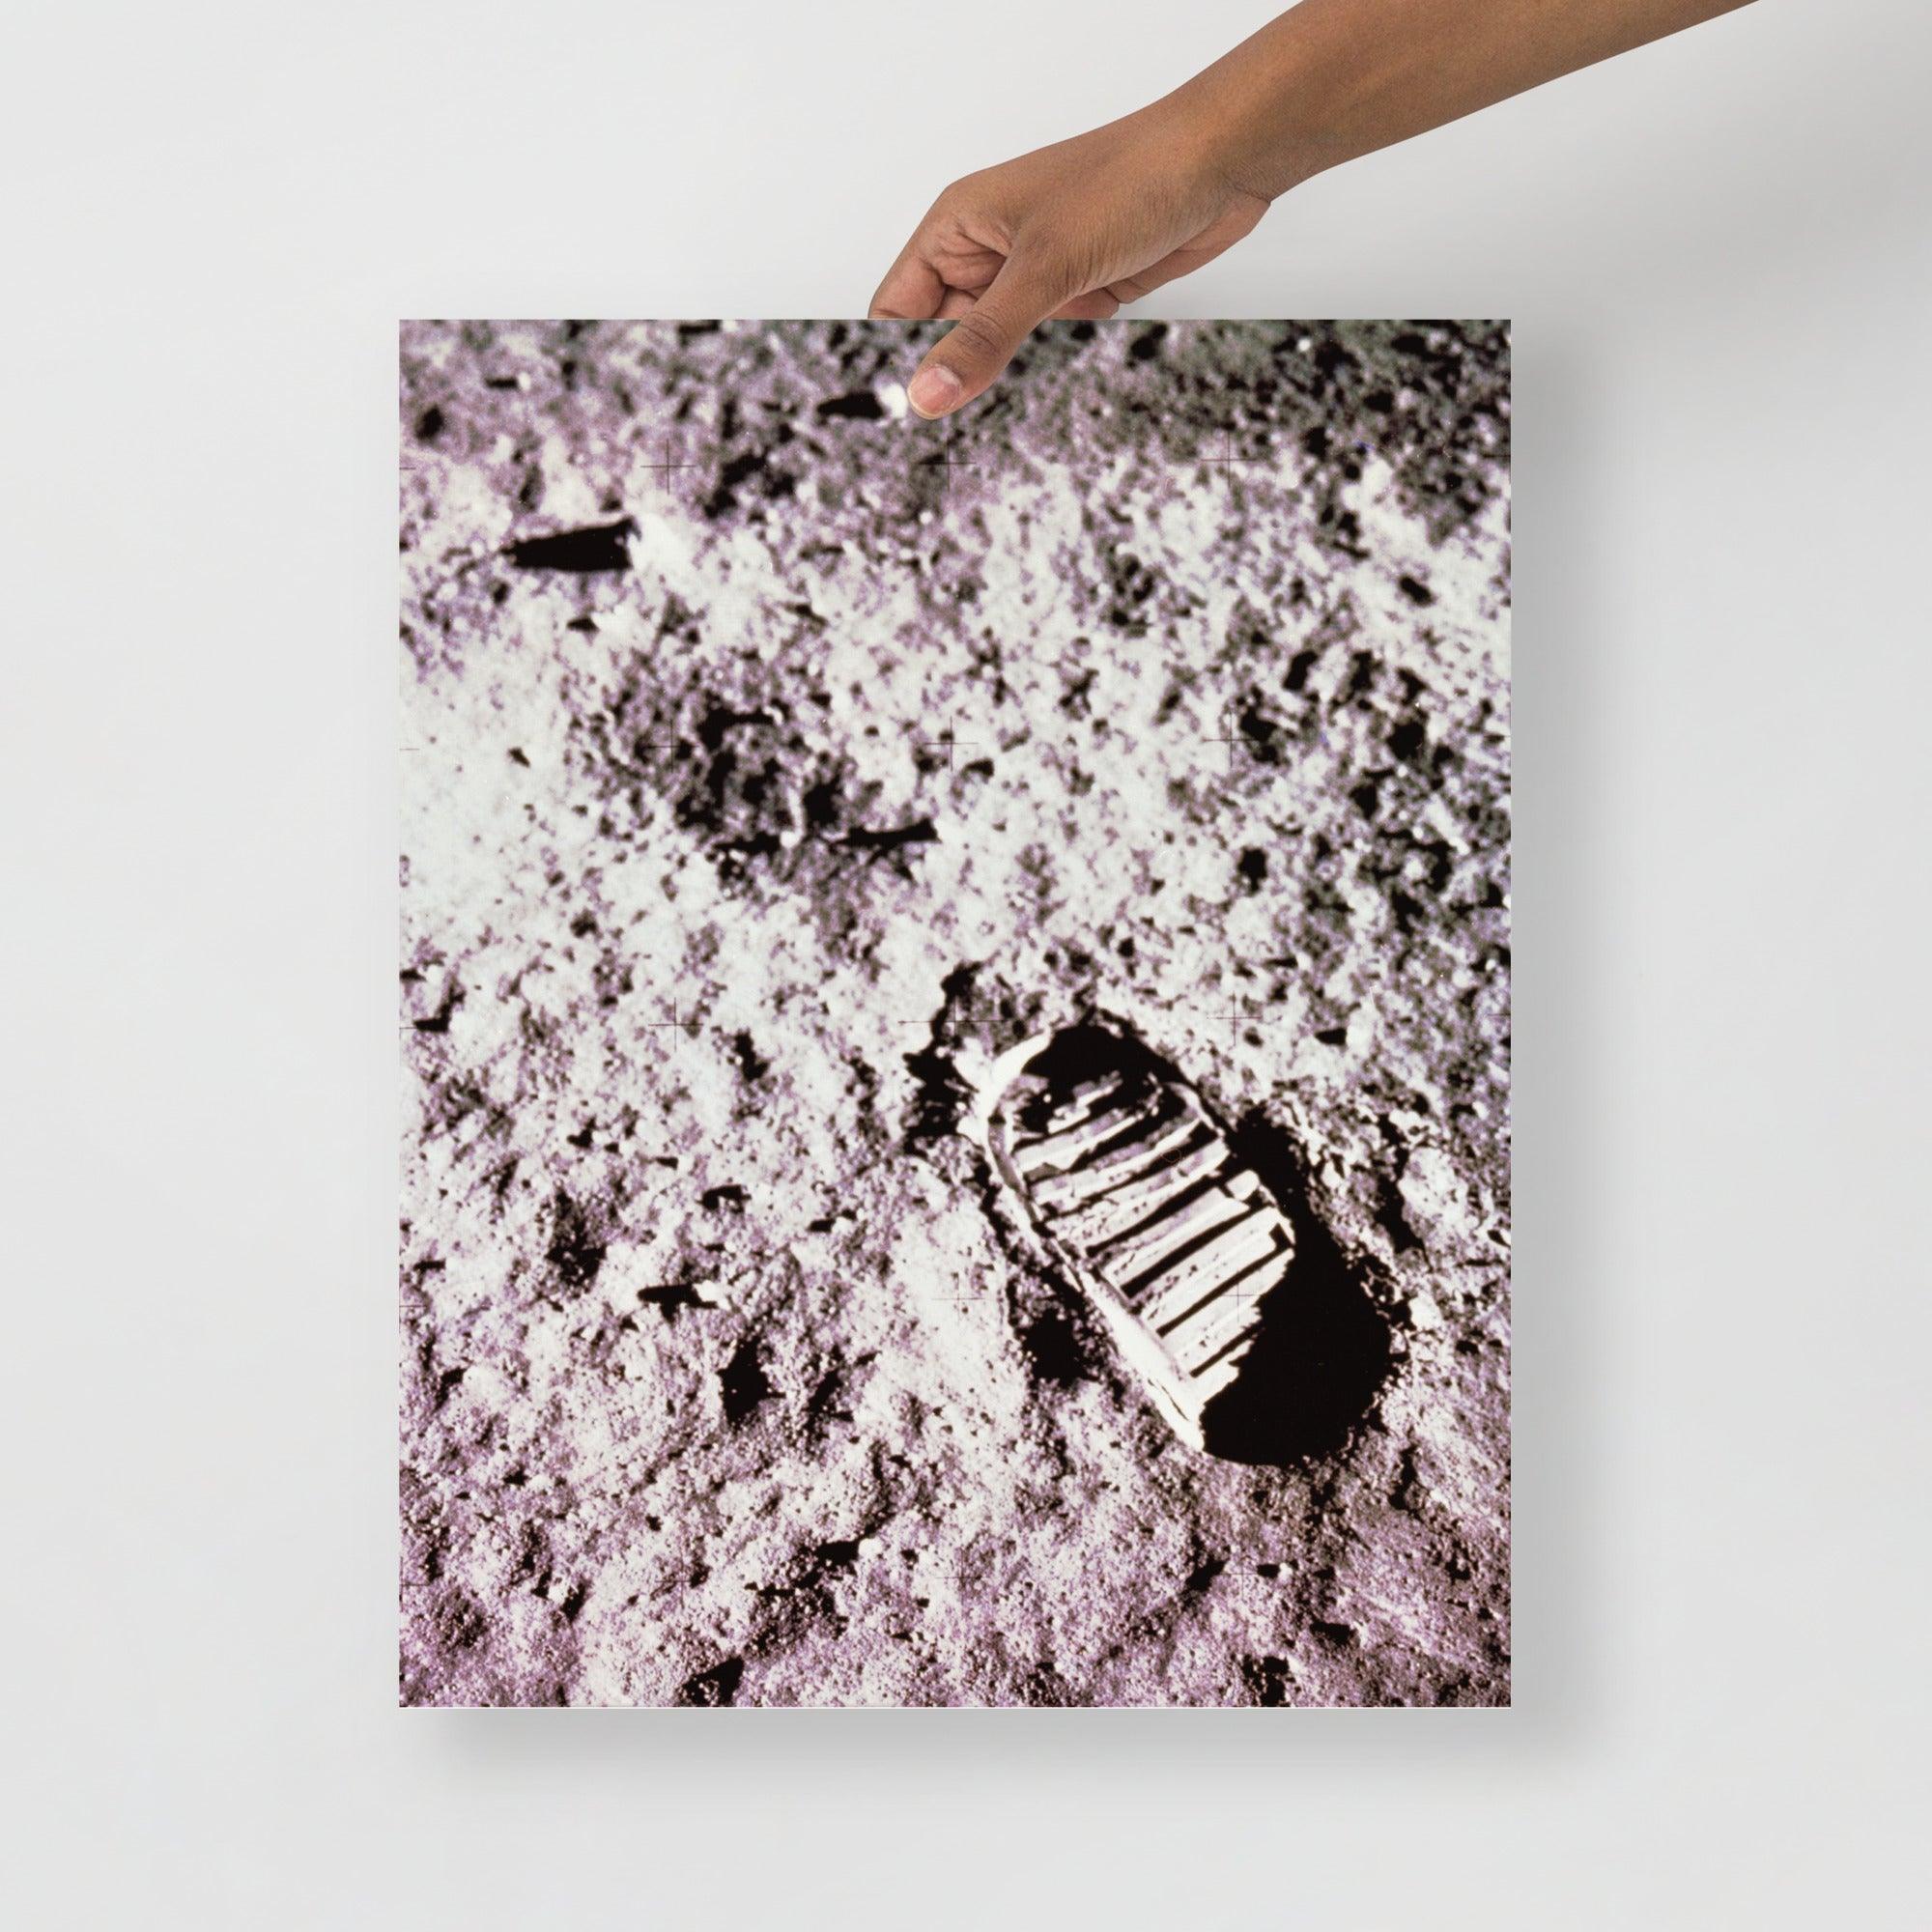 A Footprint on the Moon Apollo 11 poster on a plain backdrop in size 16x20”.